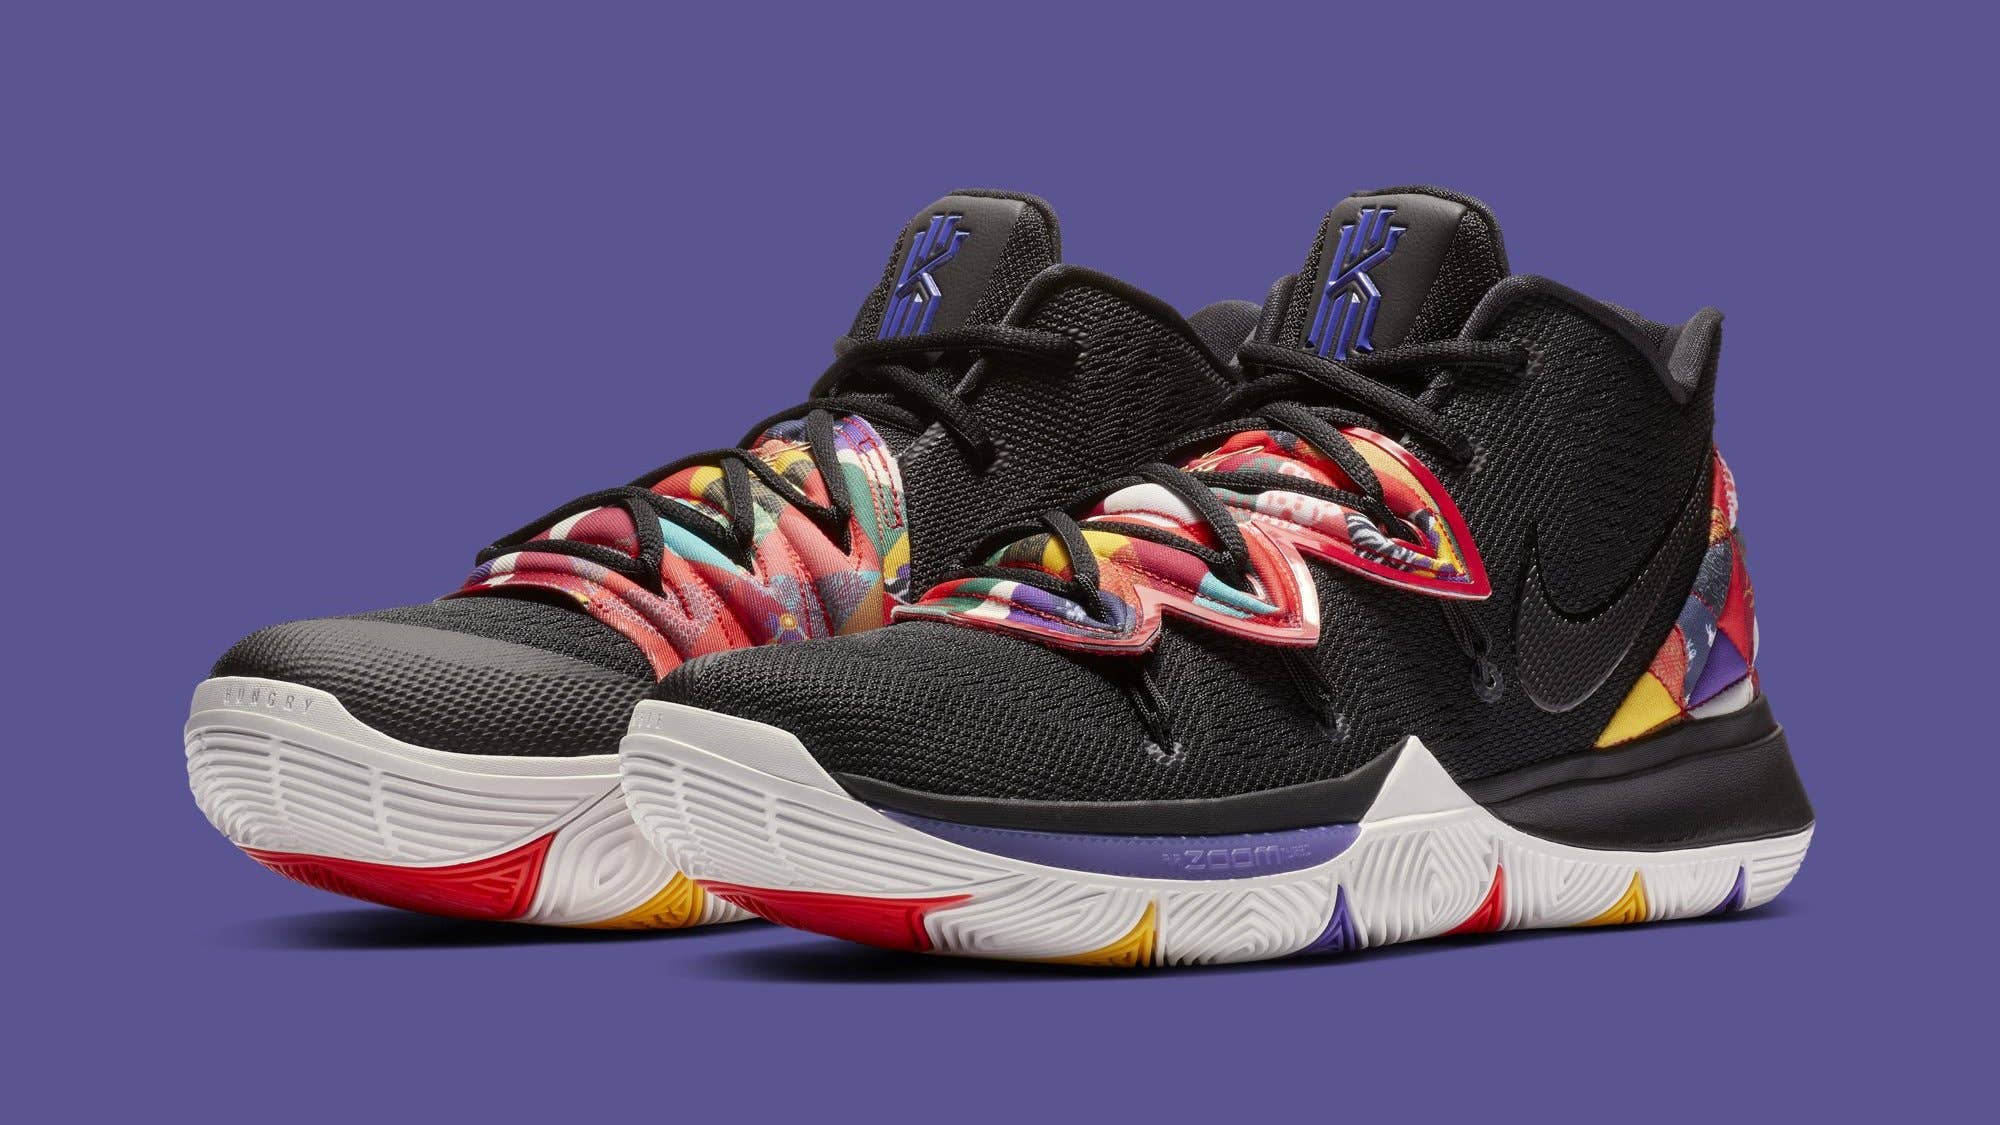 Nike Kyrie 5 'Chinese New Year' AO2919 010 (Pair)